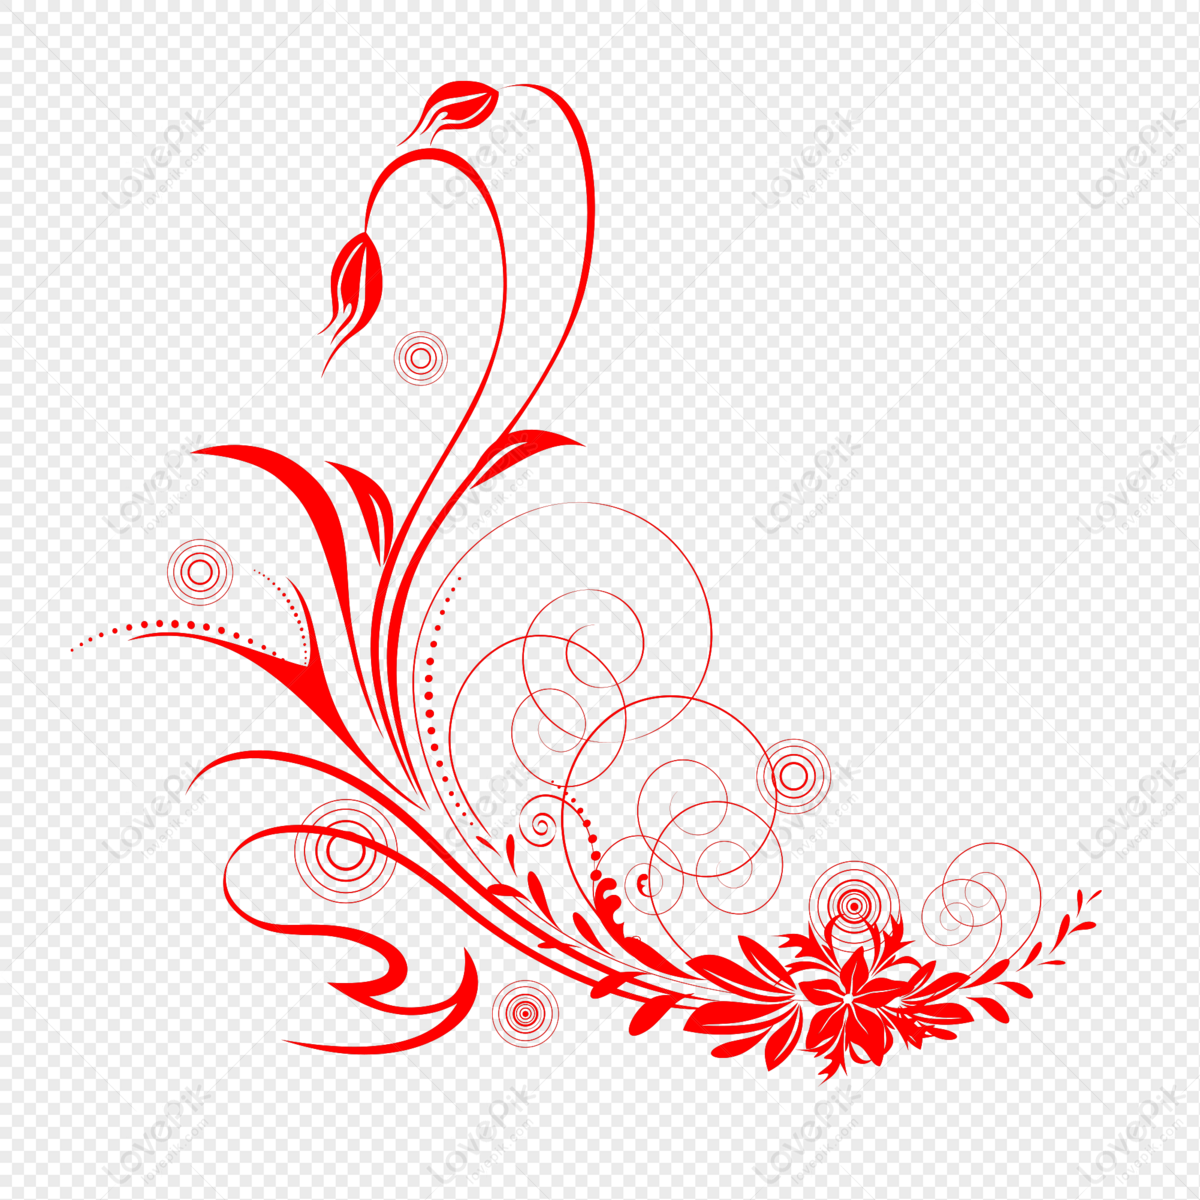 Decorative Pattern PNG Images With Transparent Background | Free ...